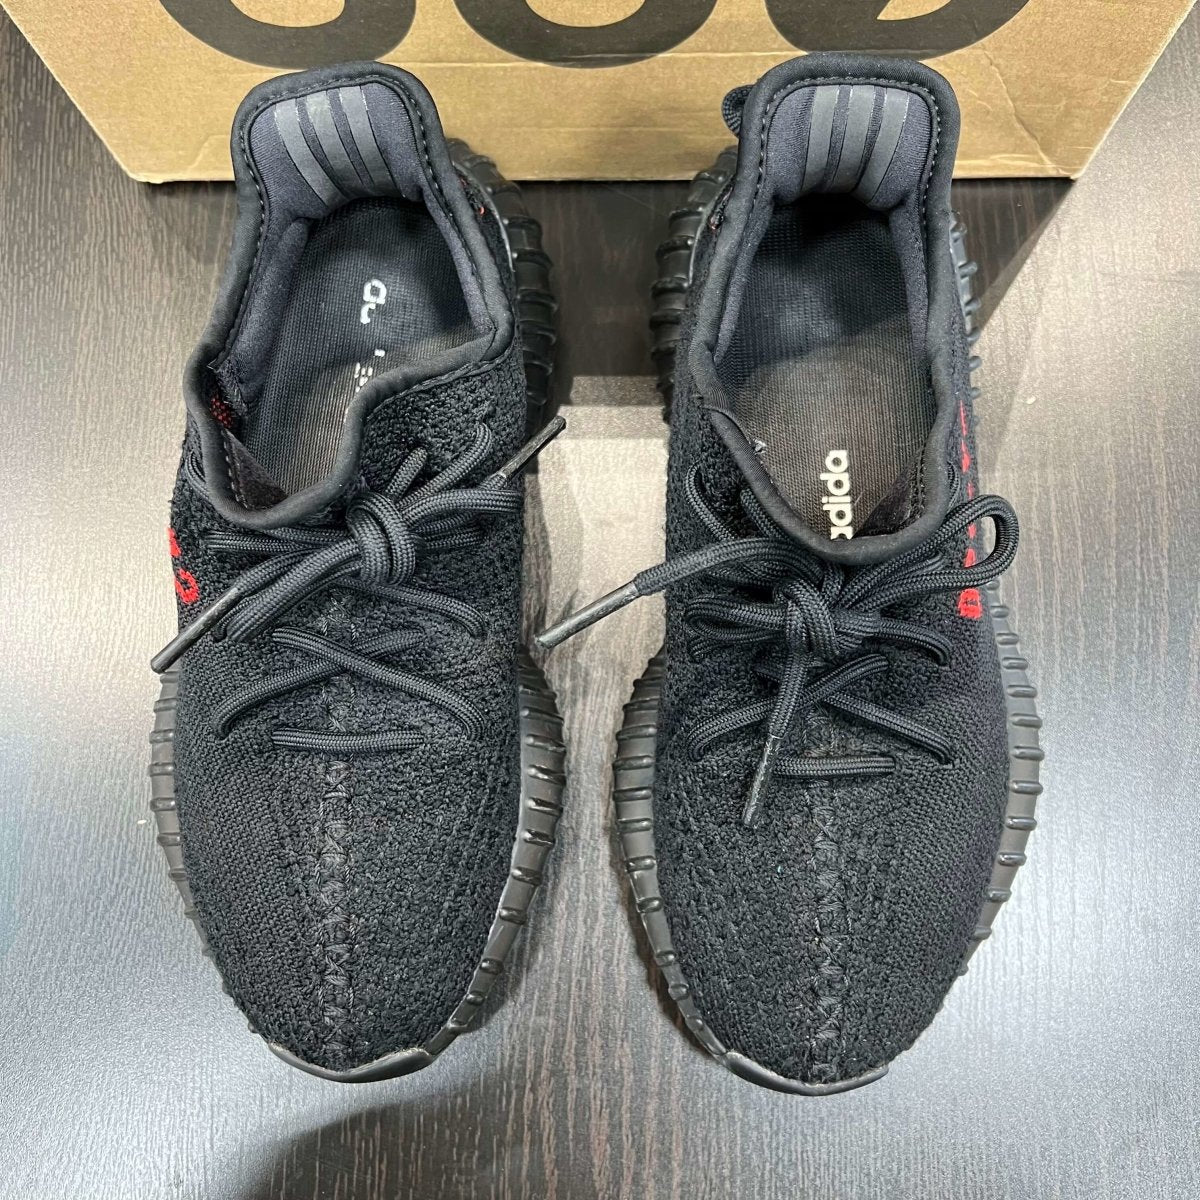 Yeezy Boost 350 V2 Black Red - Gently Enjoyed (Used) Men 5 - Low Sneaker - Yeezy - Jawns on Fire